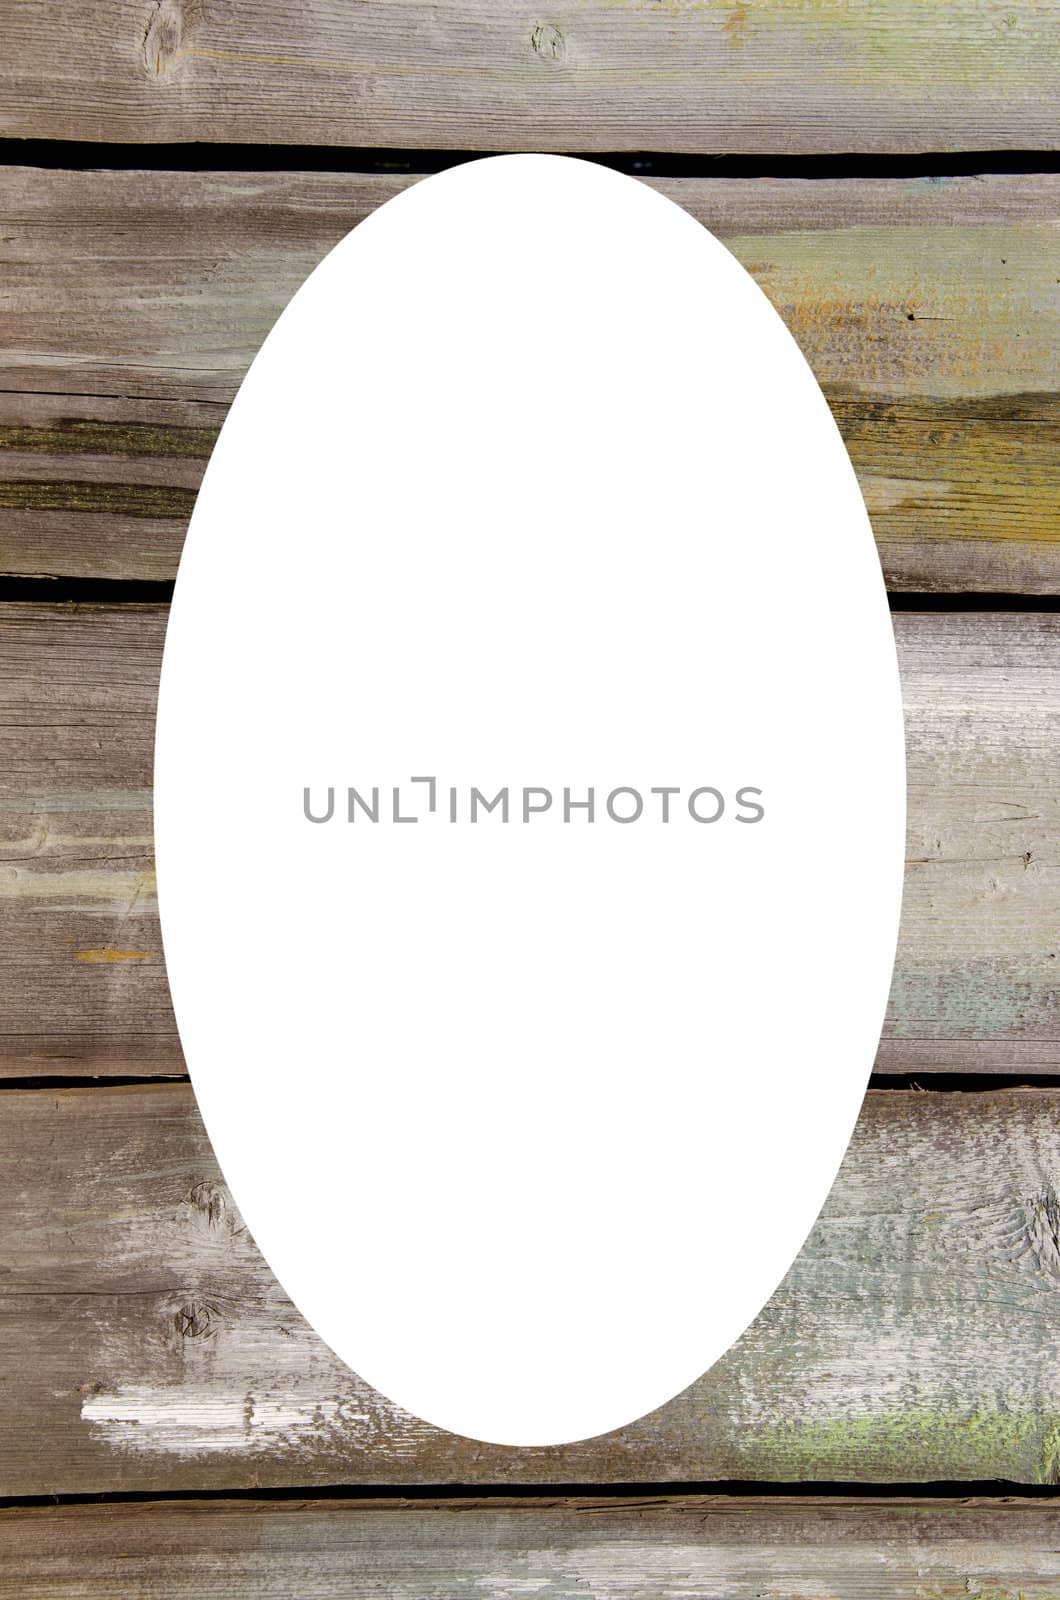 Isolated white oval place for text photograph image in center of frame. Abandoned building wooden walls of the plank background.